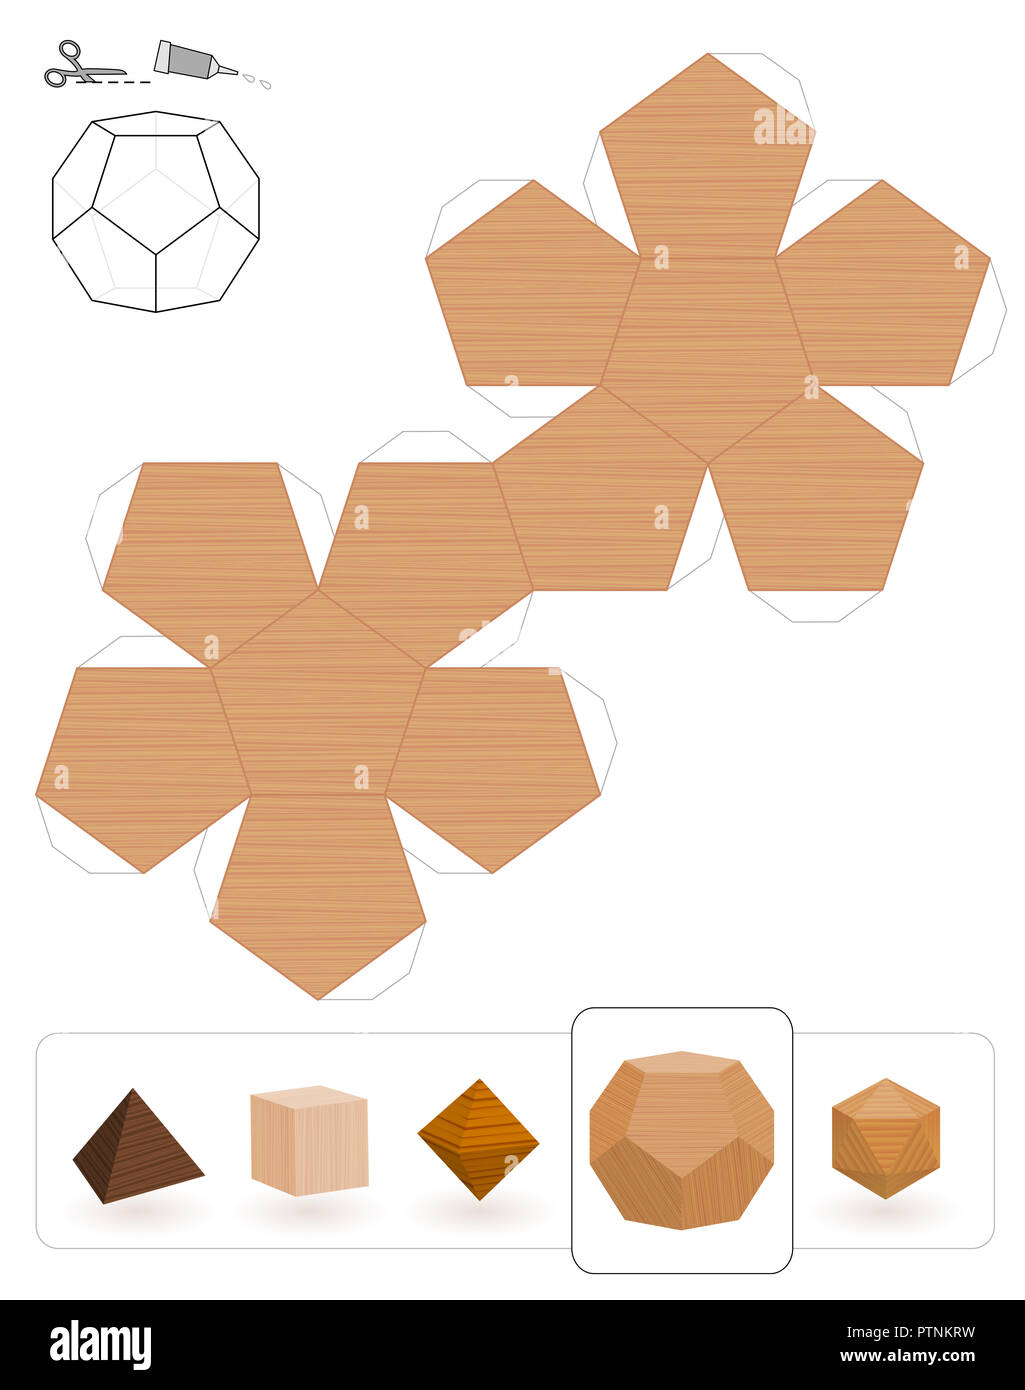 Platonic solids. Template of a dodecahedron with wooden texture to make a 3d paper model out of the triangle net. Stock Photo